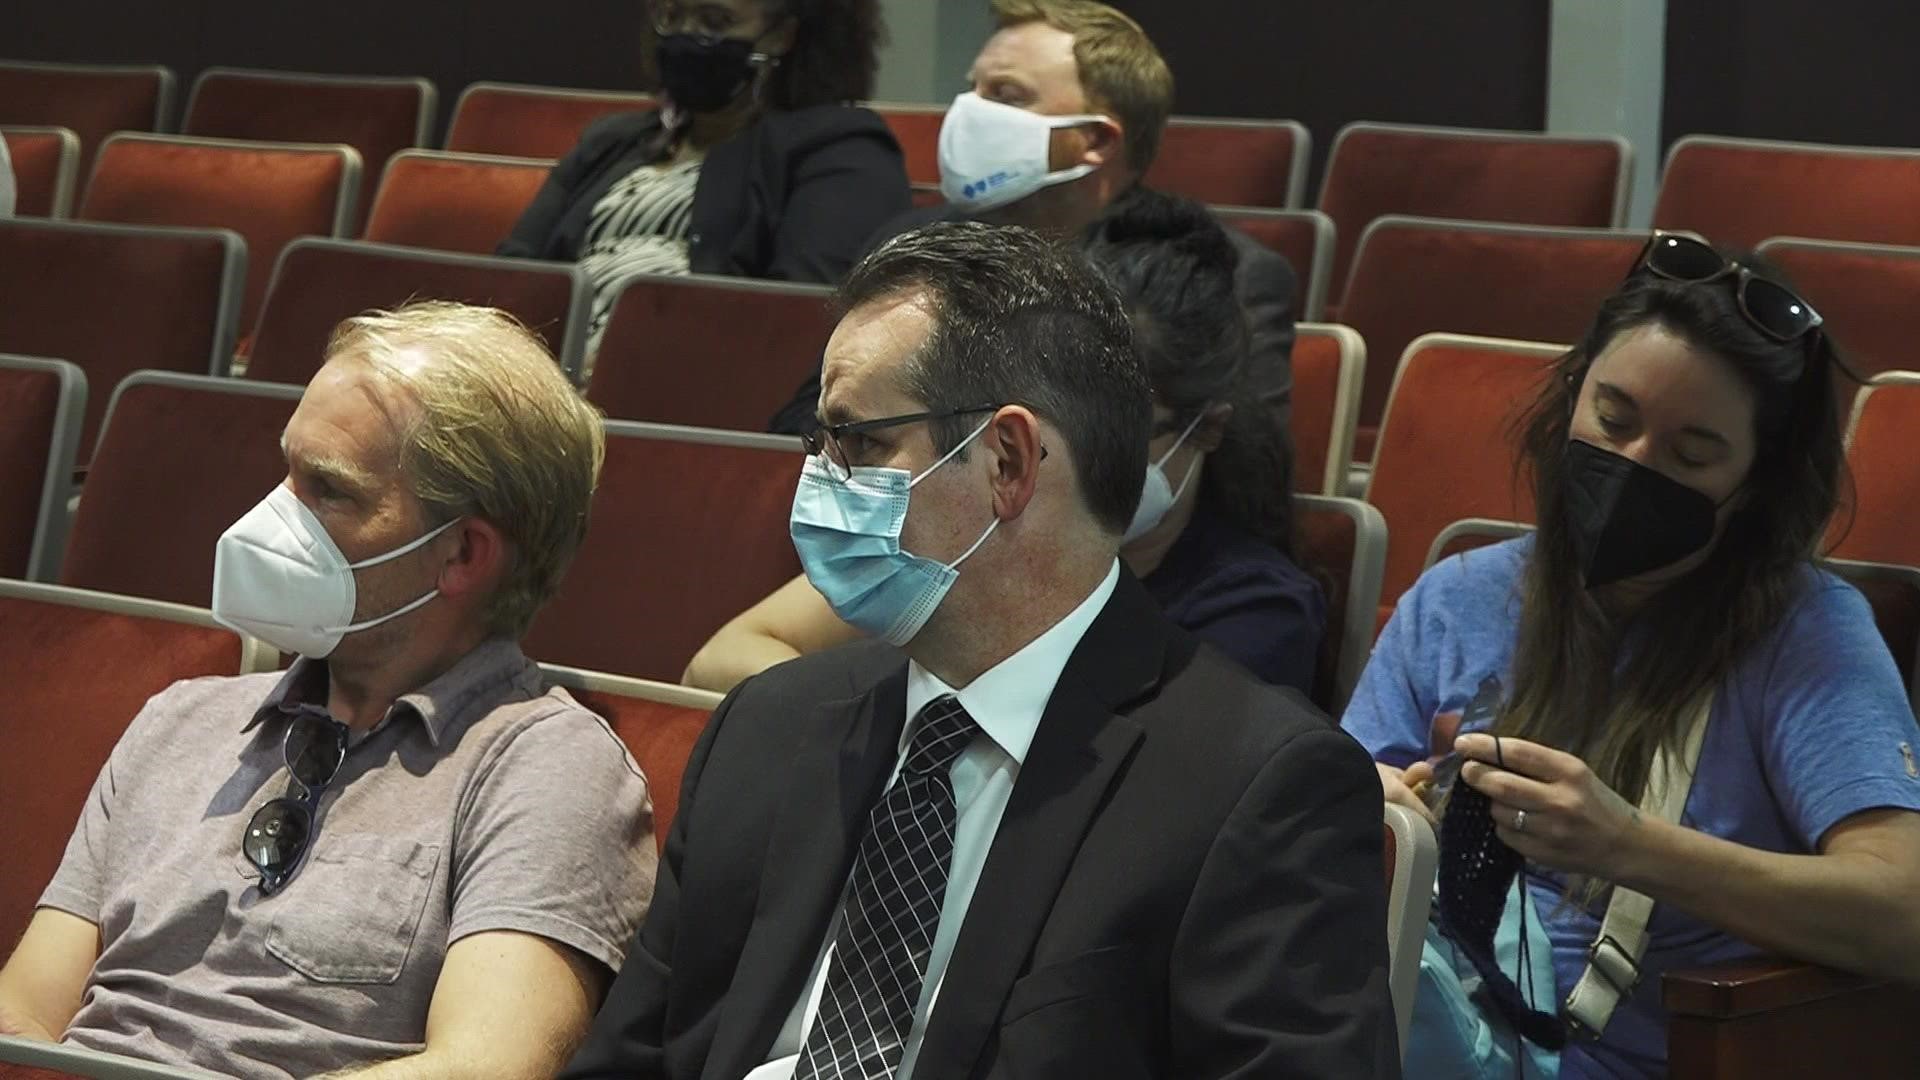 Regardless of age or vaccination status, everyone is required to wear a mask indoors.